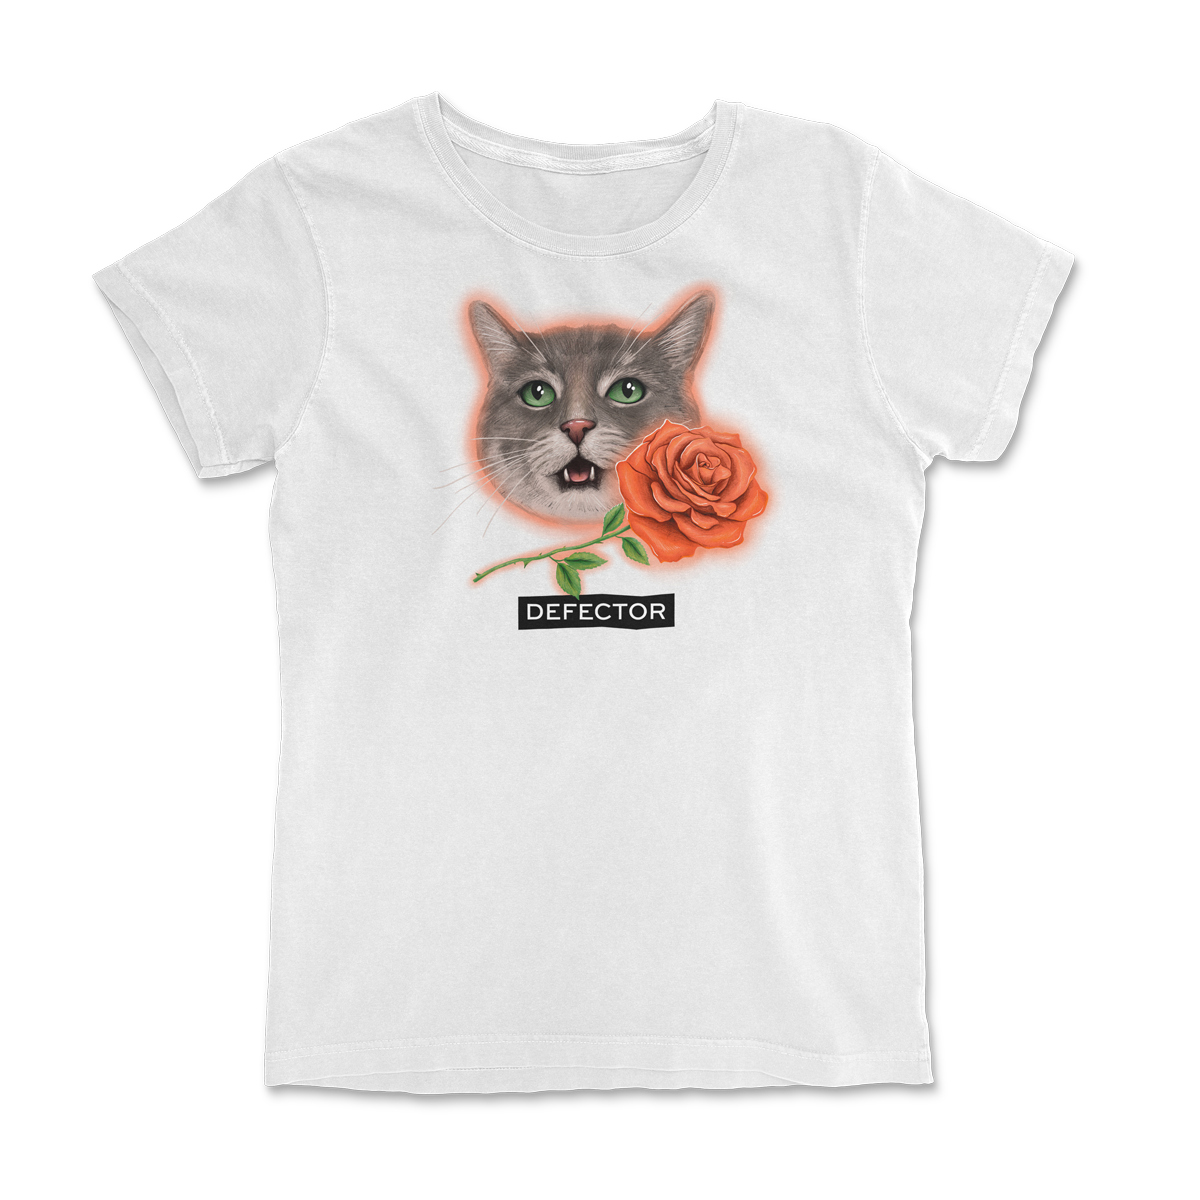 Very photogenic cat drawing. The cat is grey with white markings and some tabby colors. There is a red rose and the Defector logo under it. WHITE SHIRT